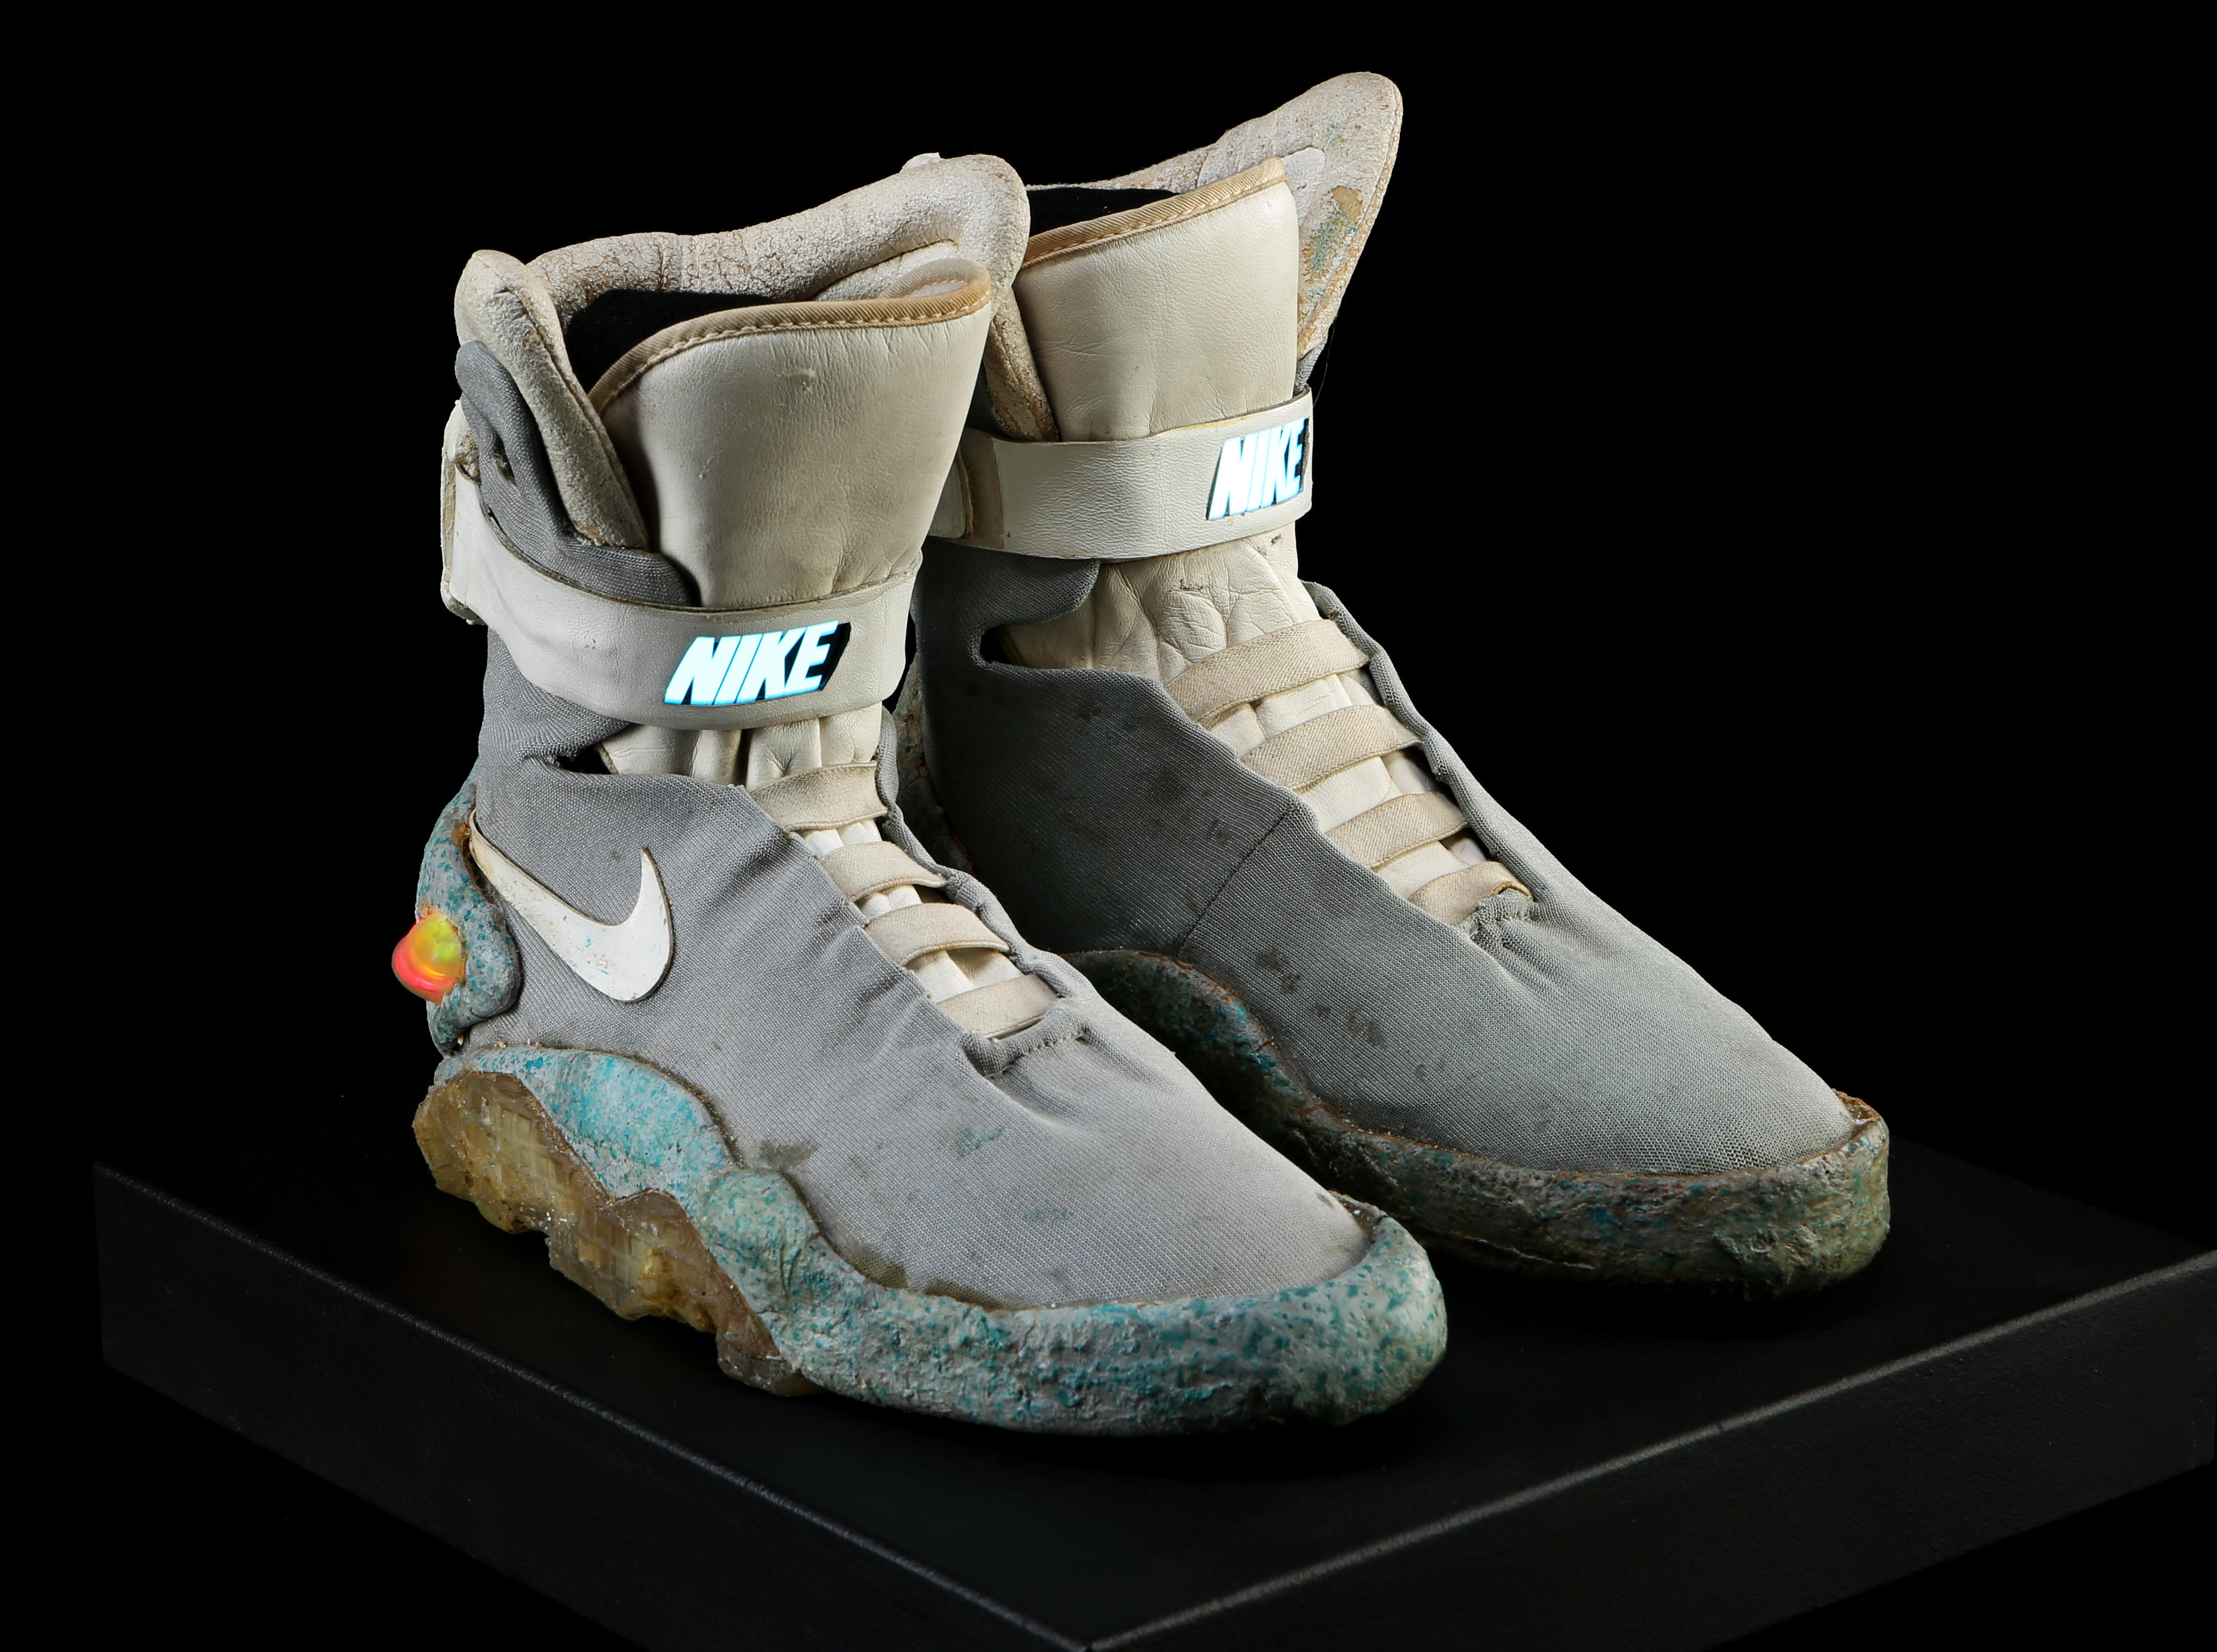 back to the future mag shoes